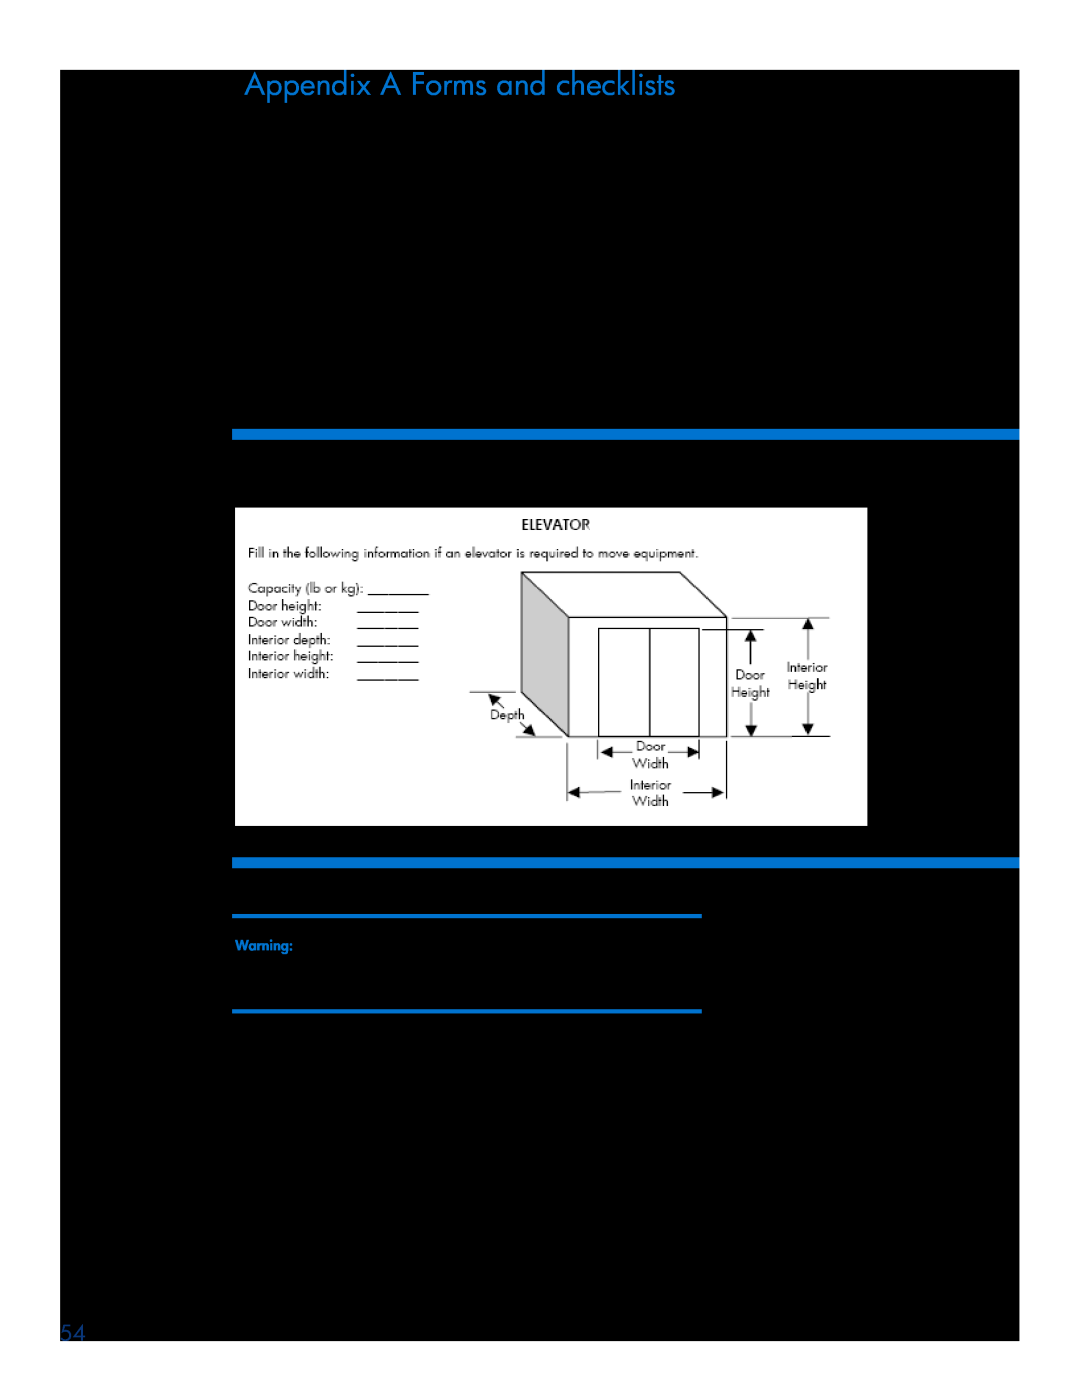 HP Modular Cooling System manual Appendix A Forms and checklists, Delivery survey form 